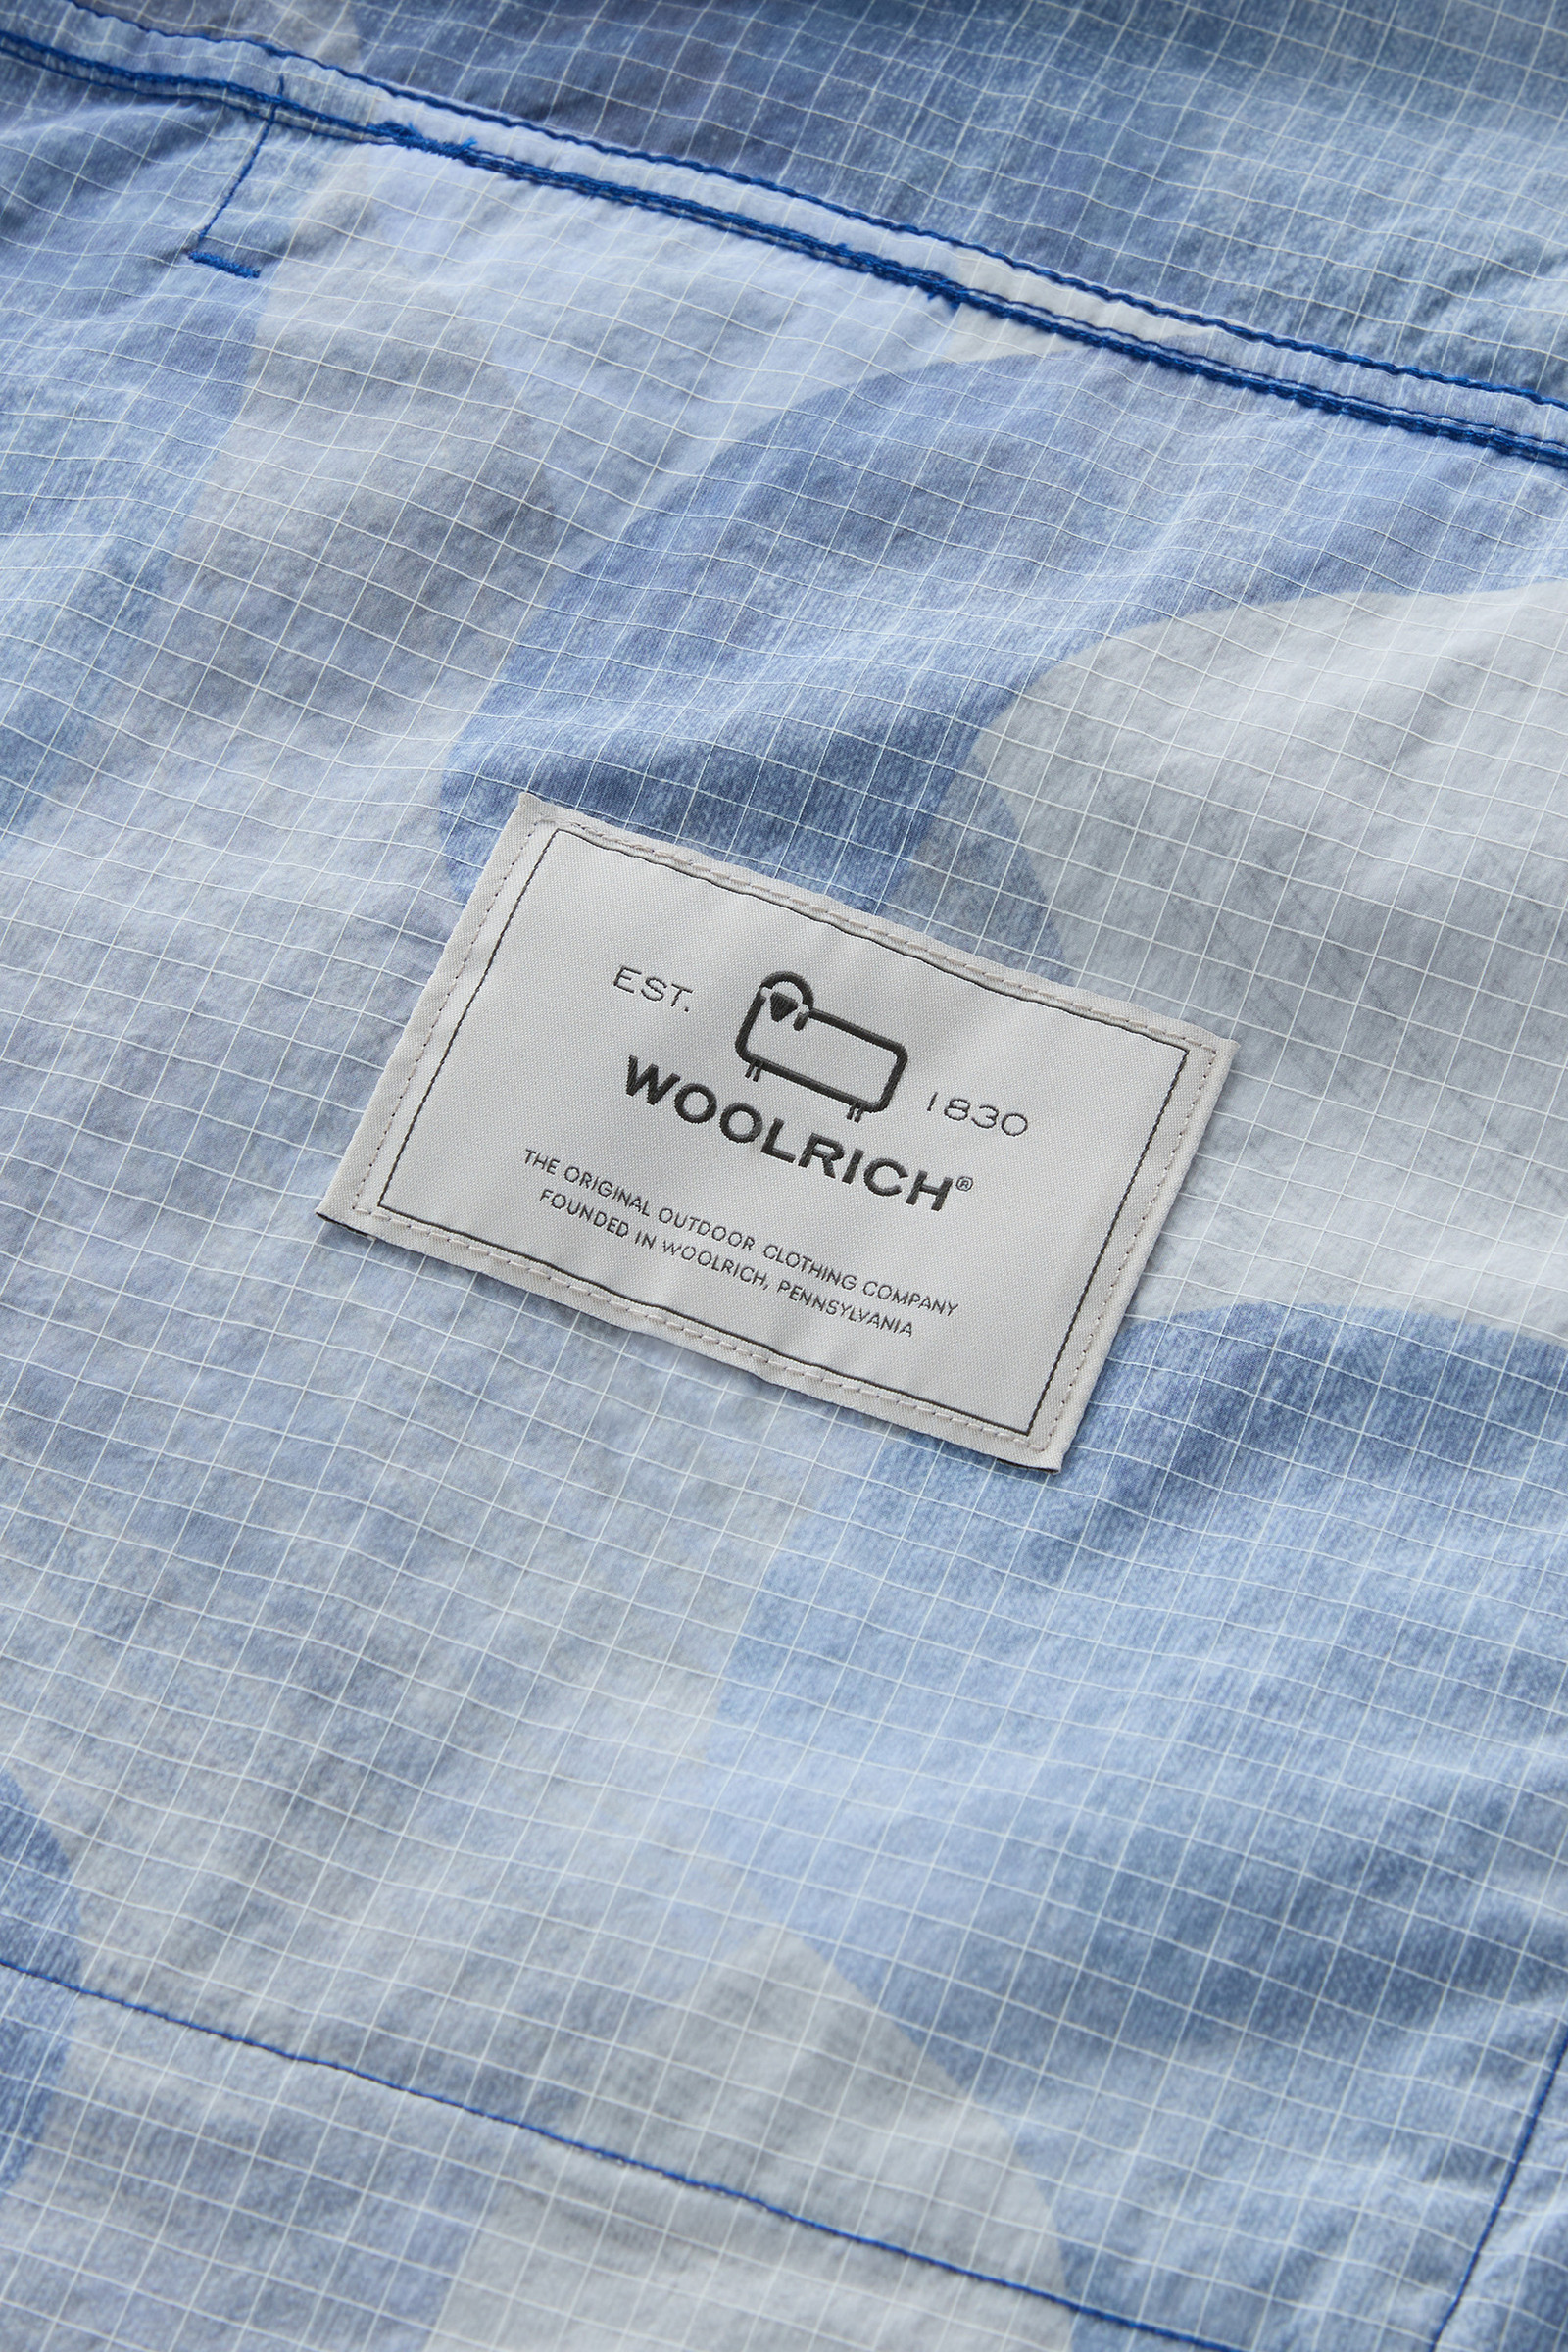 WOOLRICH® The Original Outdoor Clothing Company